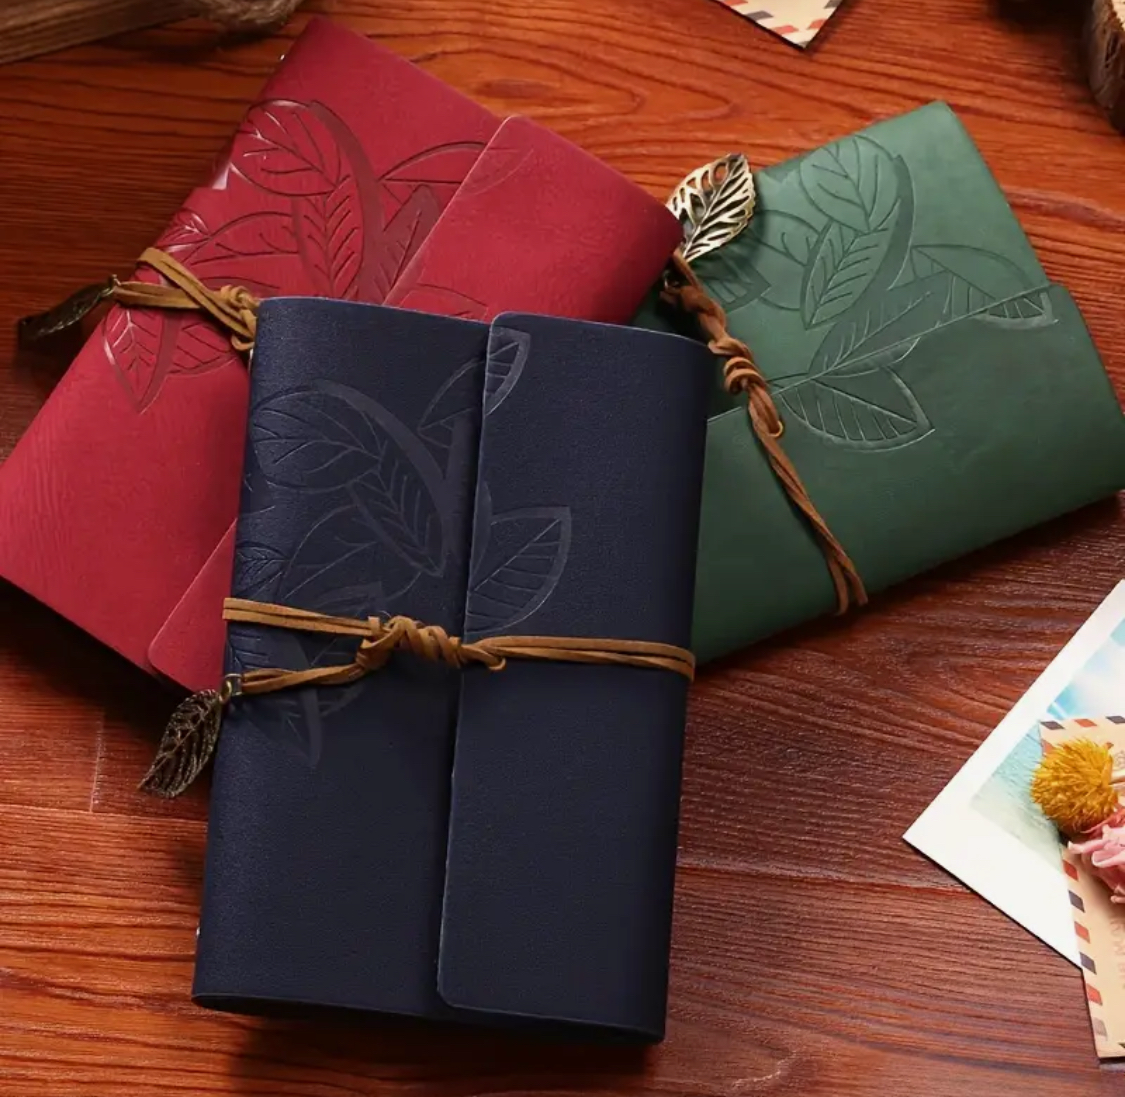 Retro Leaf Faux Leather Loose-leaf Notebook Strap Portable Travel Record Hand Ledger Learning Stationery